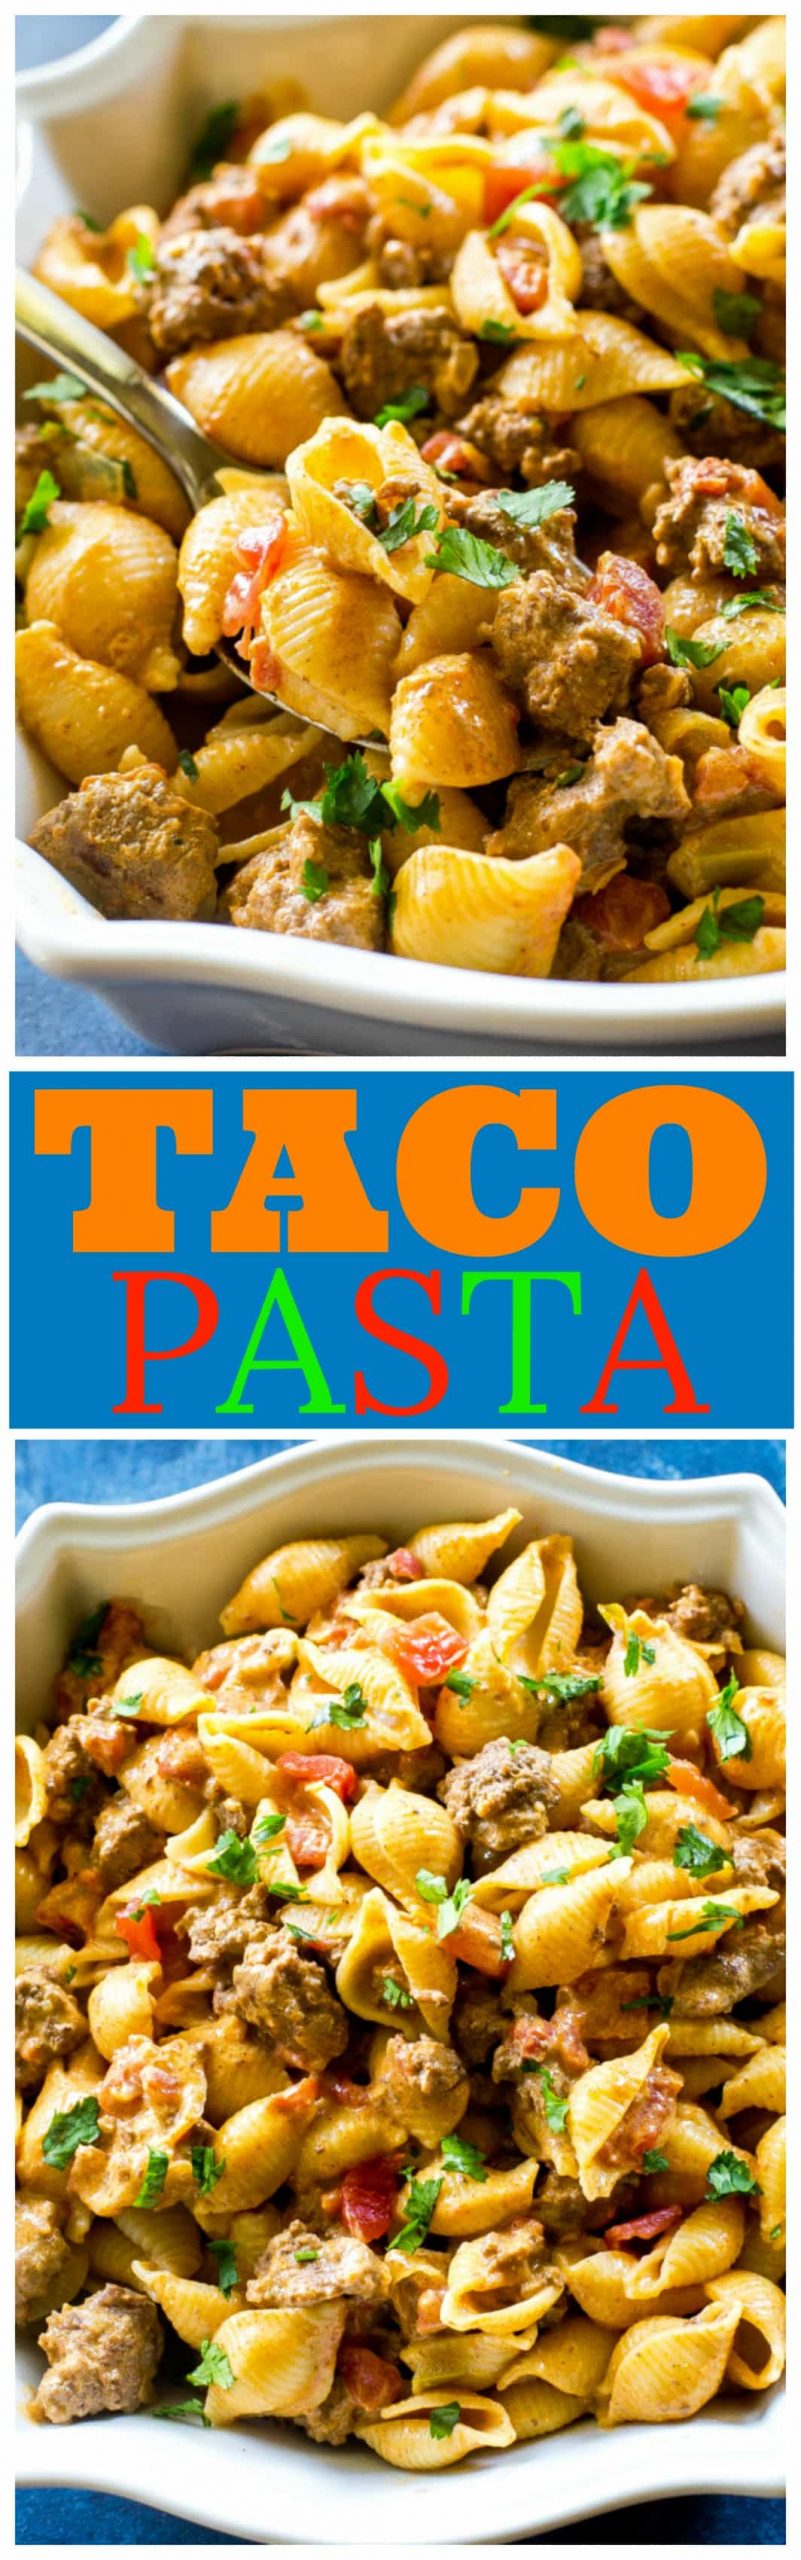 Taco Pasta - creamy, spicy pasta for an easy Italian meets Mexican dinner. #mexican #pasta #taco #beef #dinner #easy #recipe